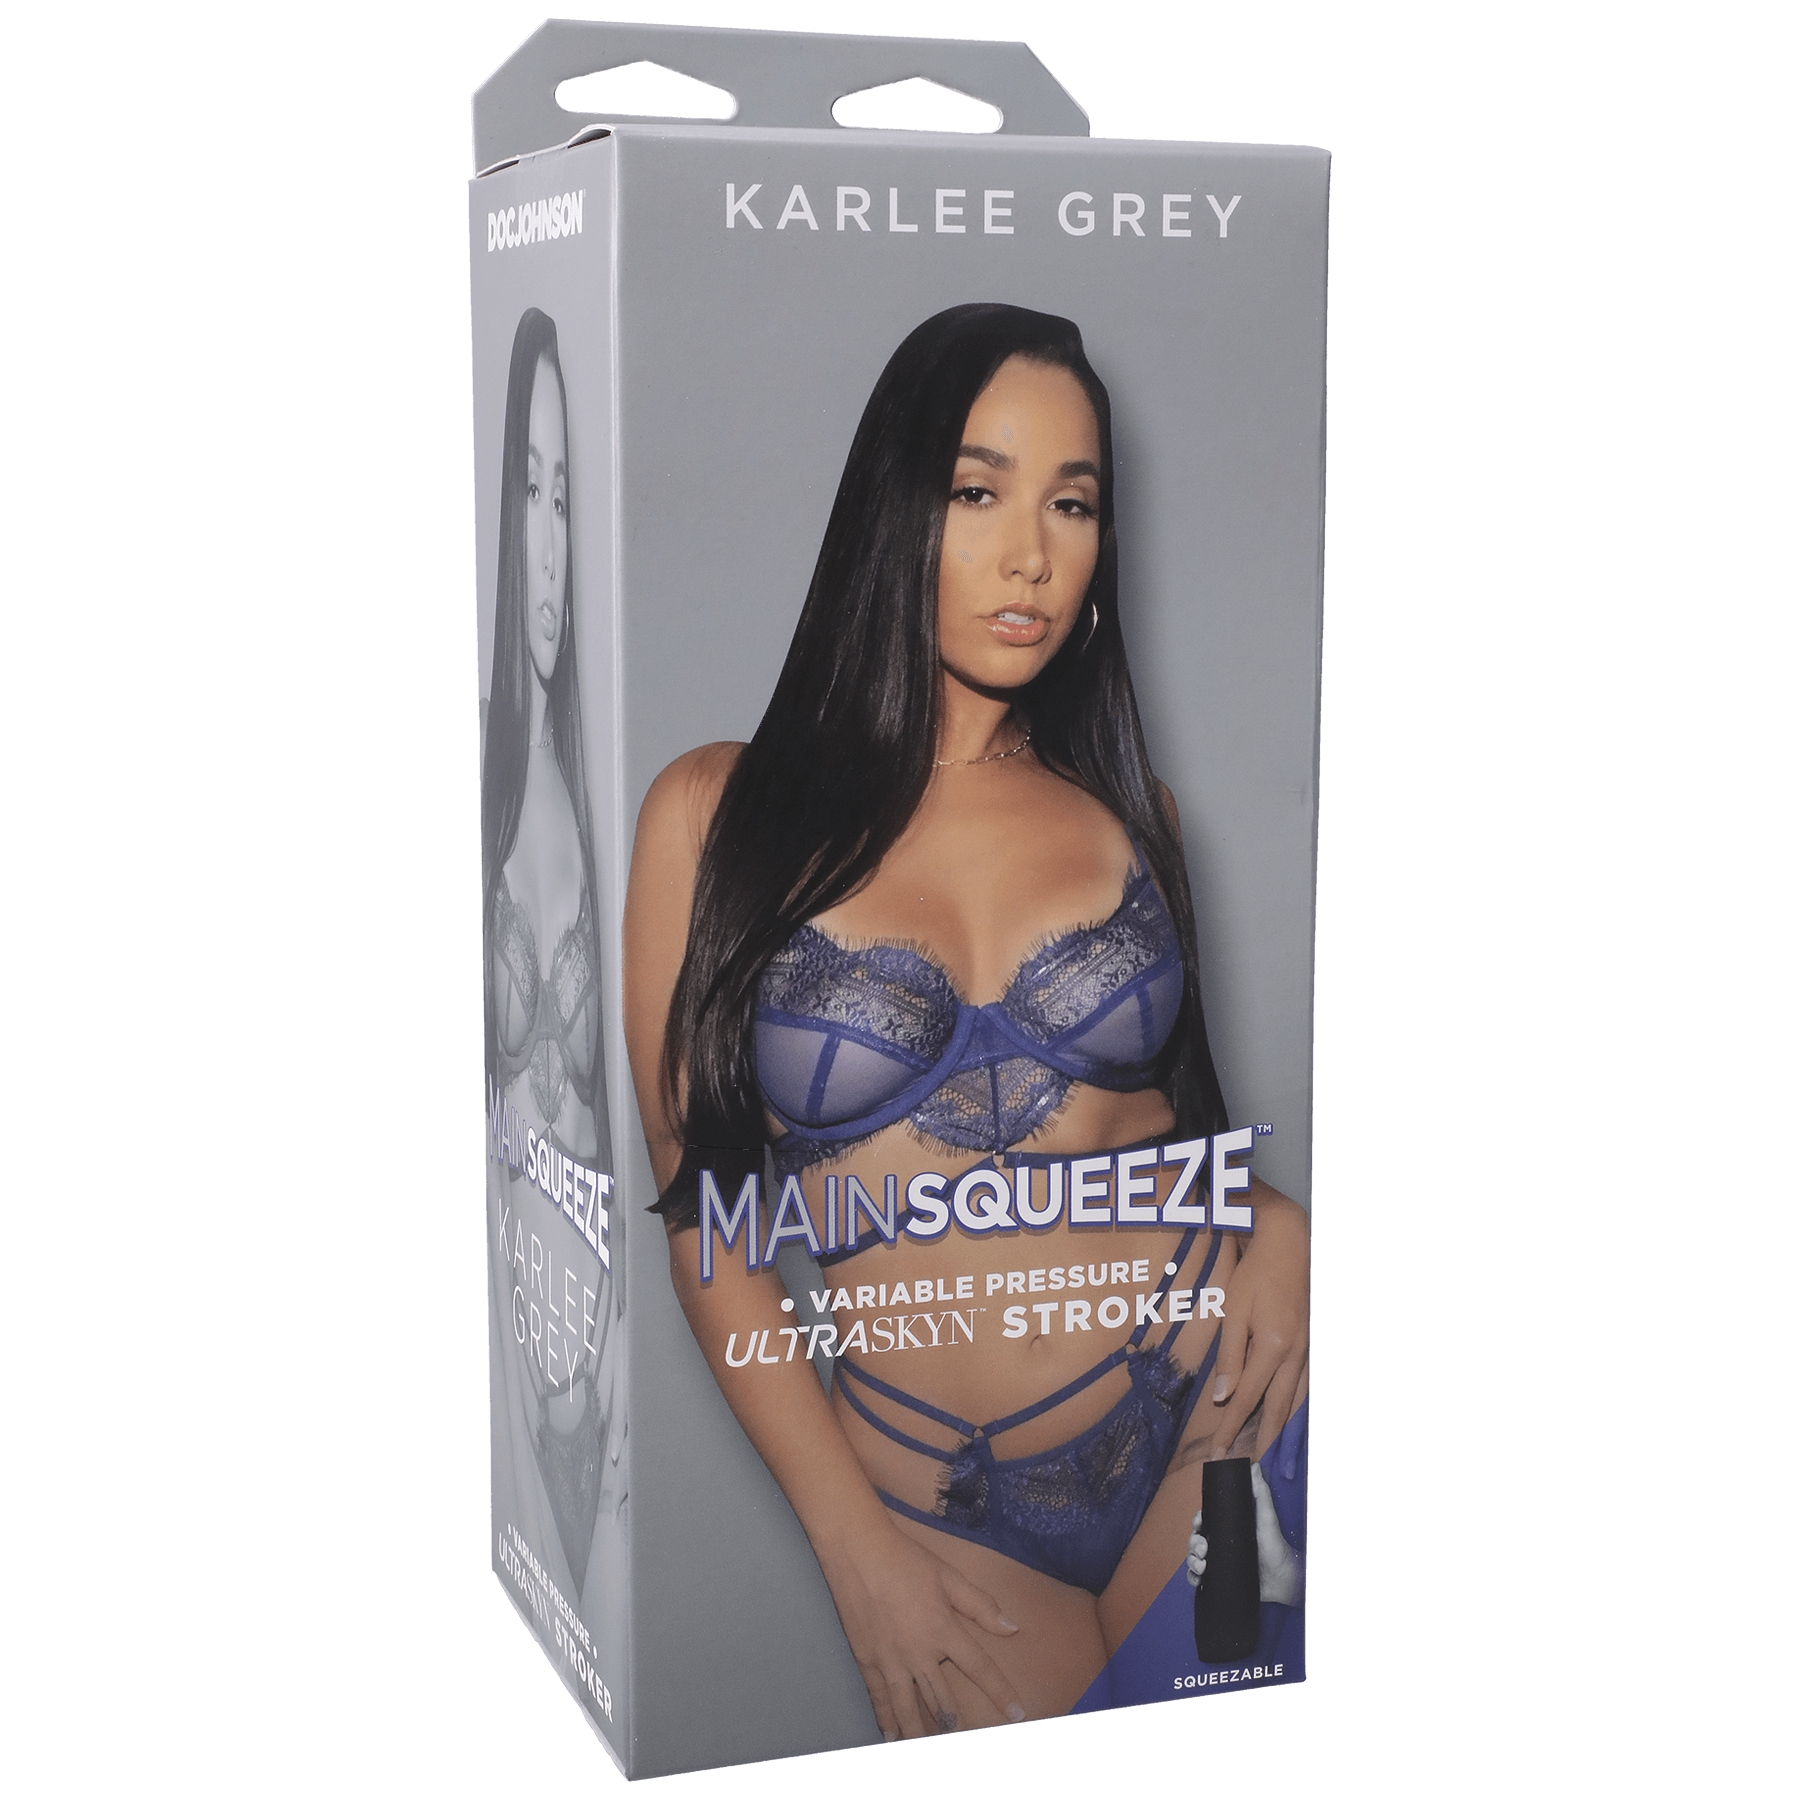 Doc Johnson Main Squeeze Karlee Grey Pussy - Buy At Luxury Toy X - Free 3-Day Shipping